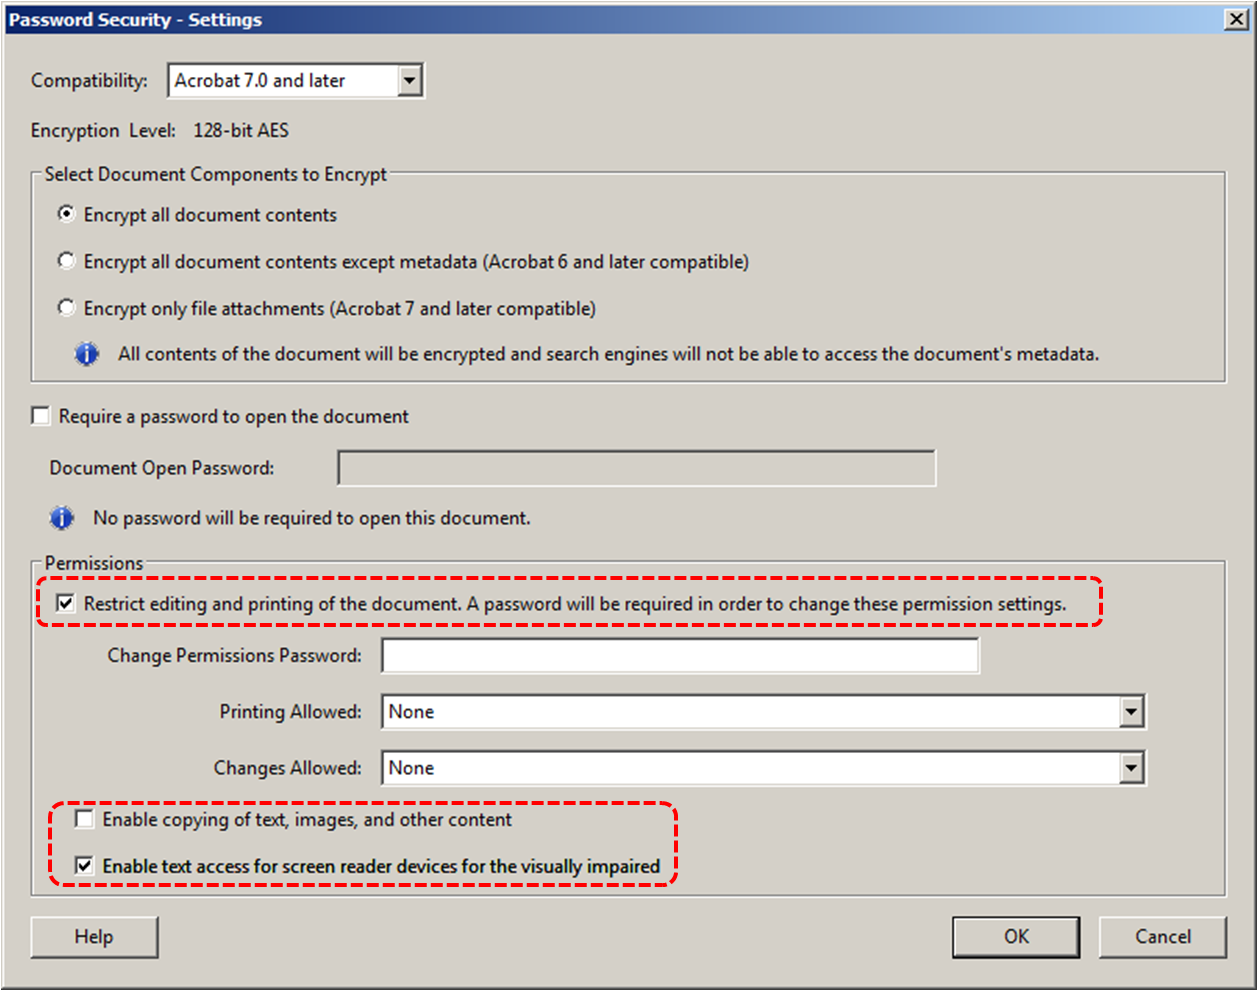 Image demonstrates location of Restrict editing and printing option, Enable copying of text option, and Enable text access for screen readers option in the Password Security - Settings dialog.